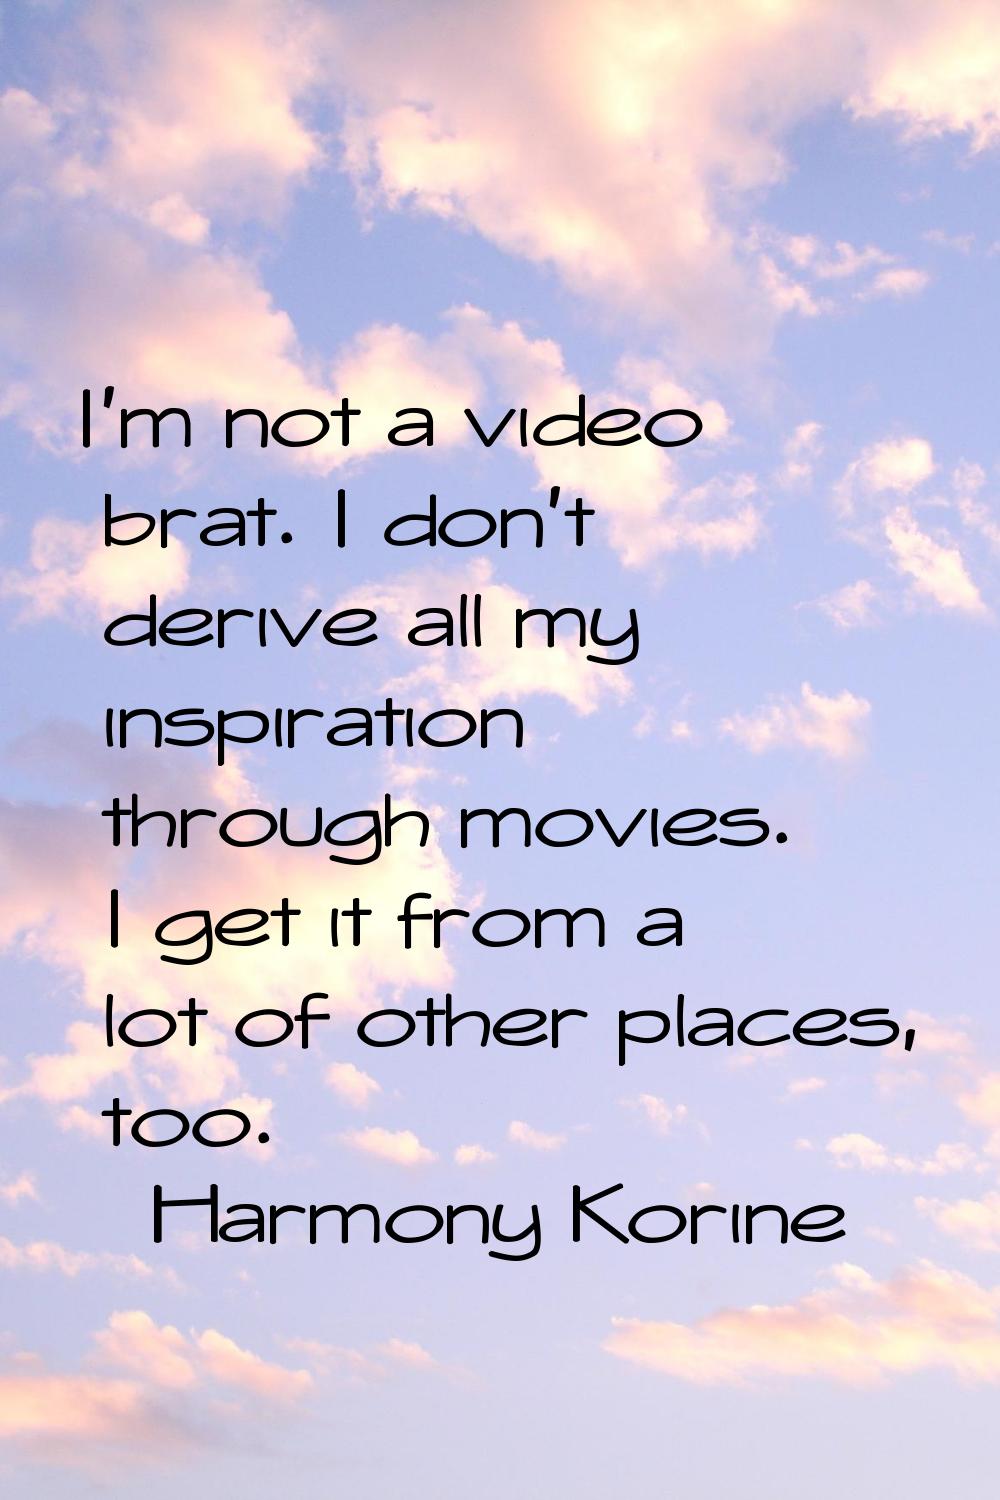 I'm not a video brat. I don't derive all my inspiration through movies. I get it from a lot of othe